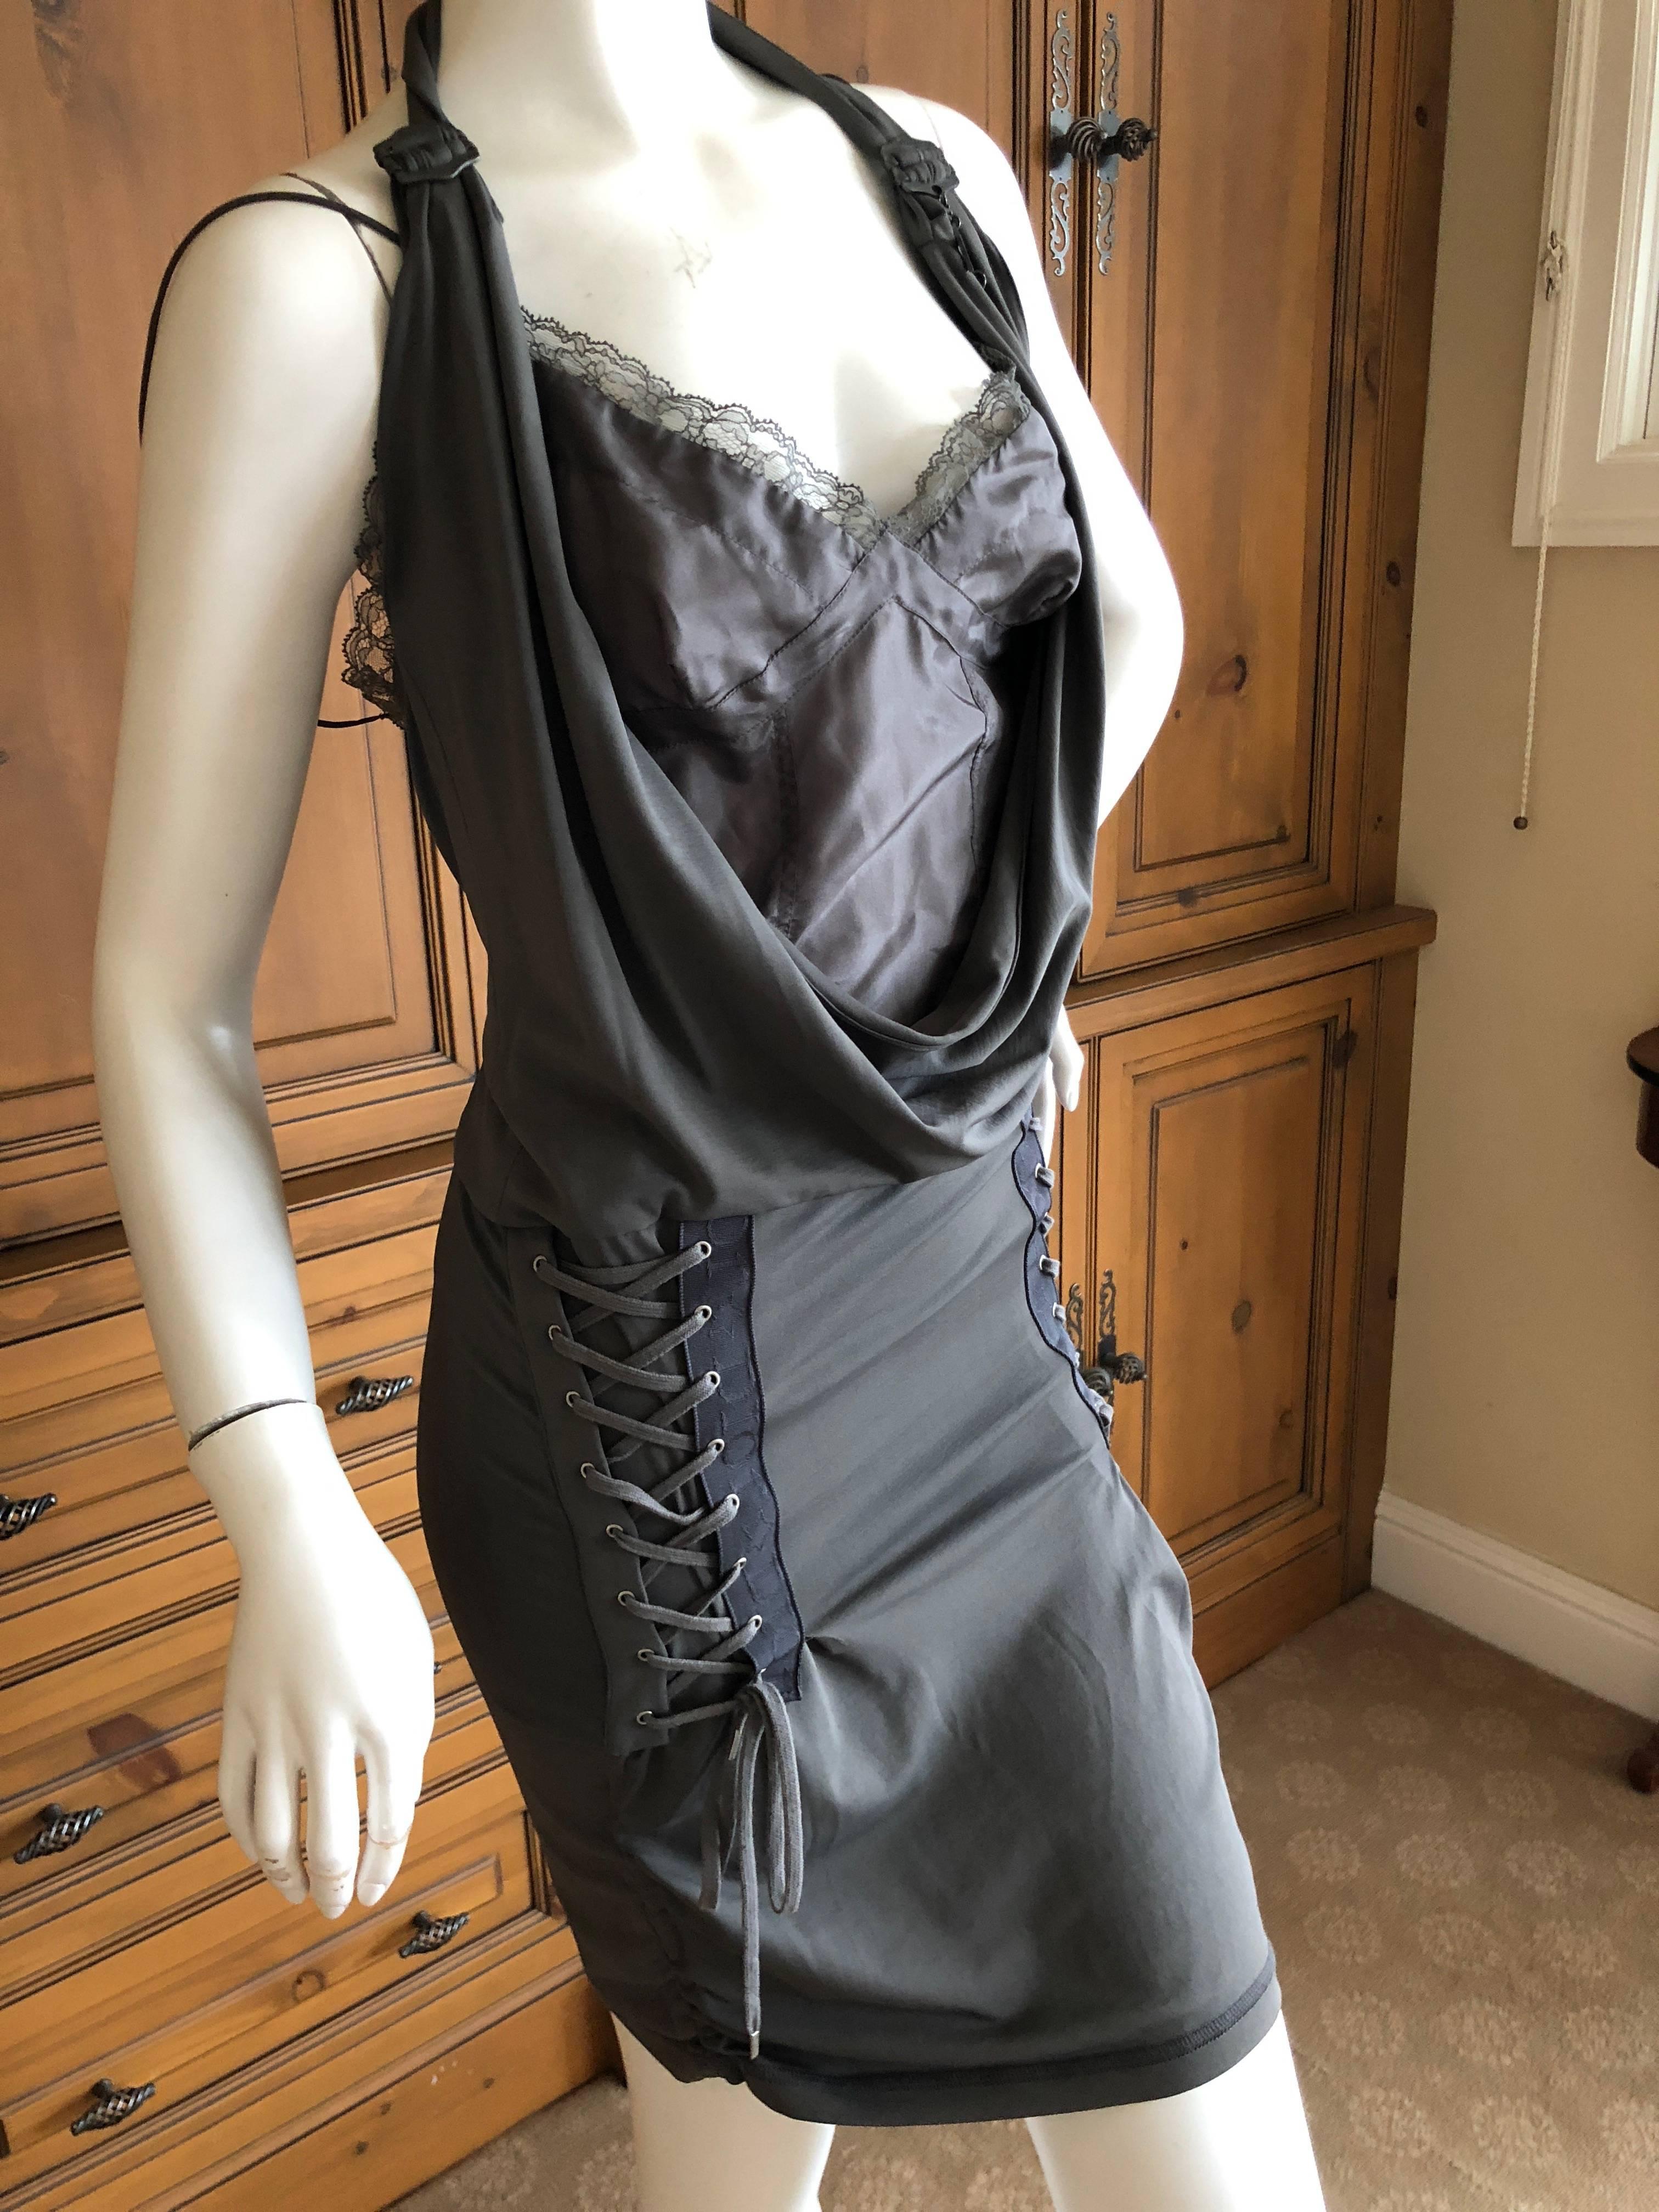 Christian Dior by John Galliano Lingerie Inspired Corset Laced Cocktail Dress In Excellent Condition For Sale In Cloverdale, CA